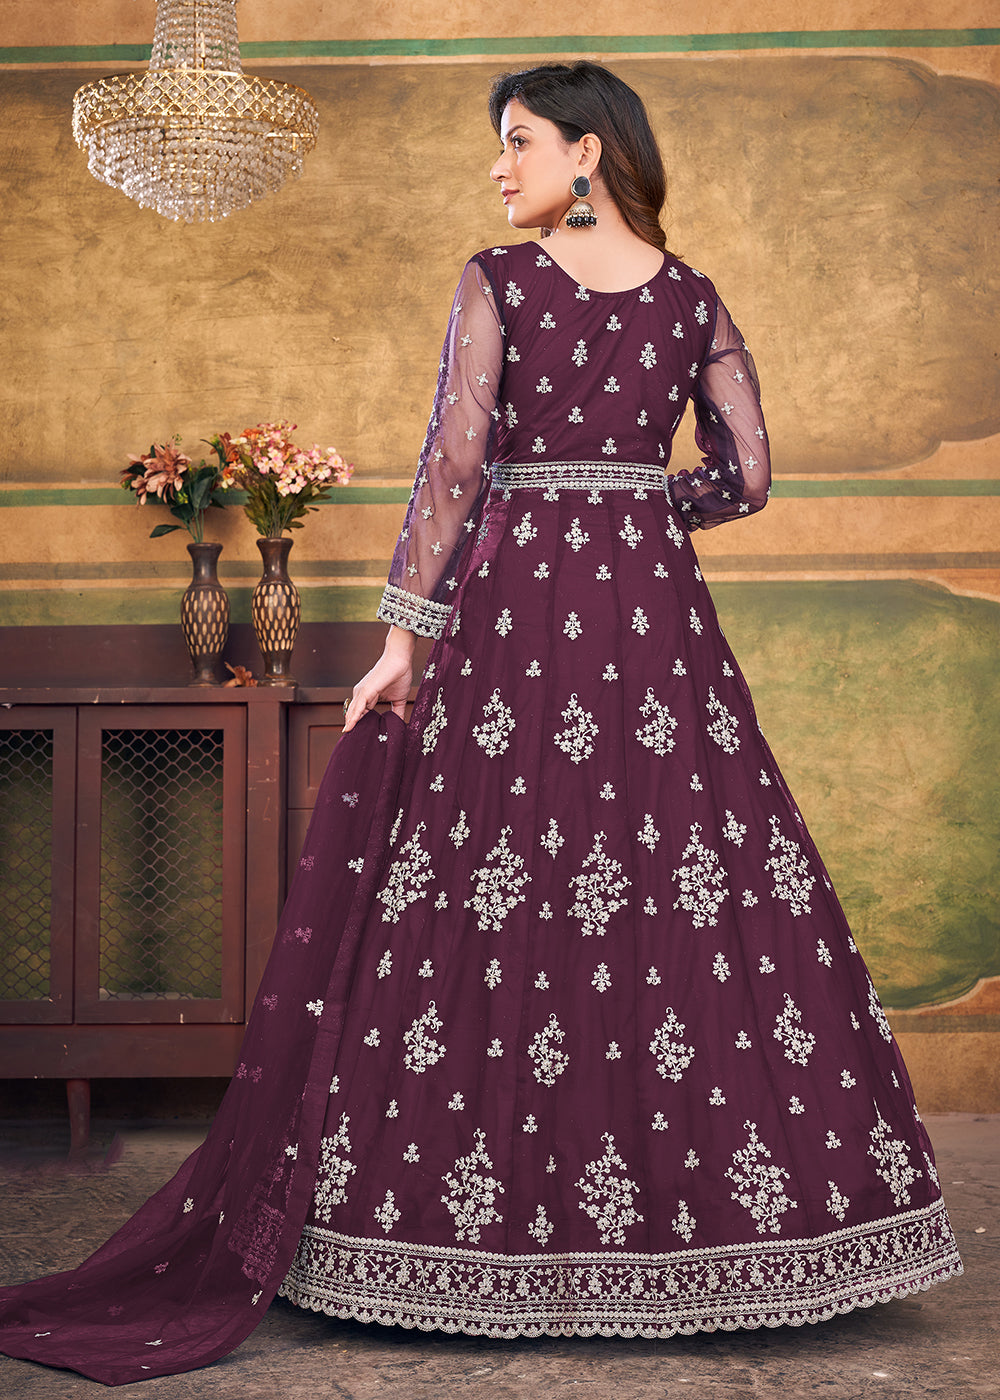 Buy Now Function Look Classic Wine Plum Net Anarkali Suit Online in USA, UK, Australia, New Zealand, Canada, Italy & Worldwide at Empress Clothing.